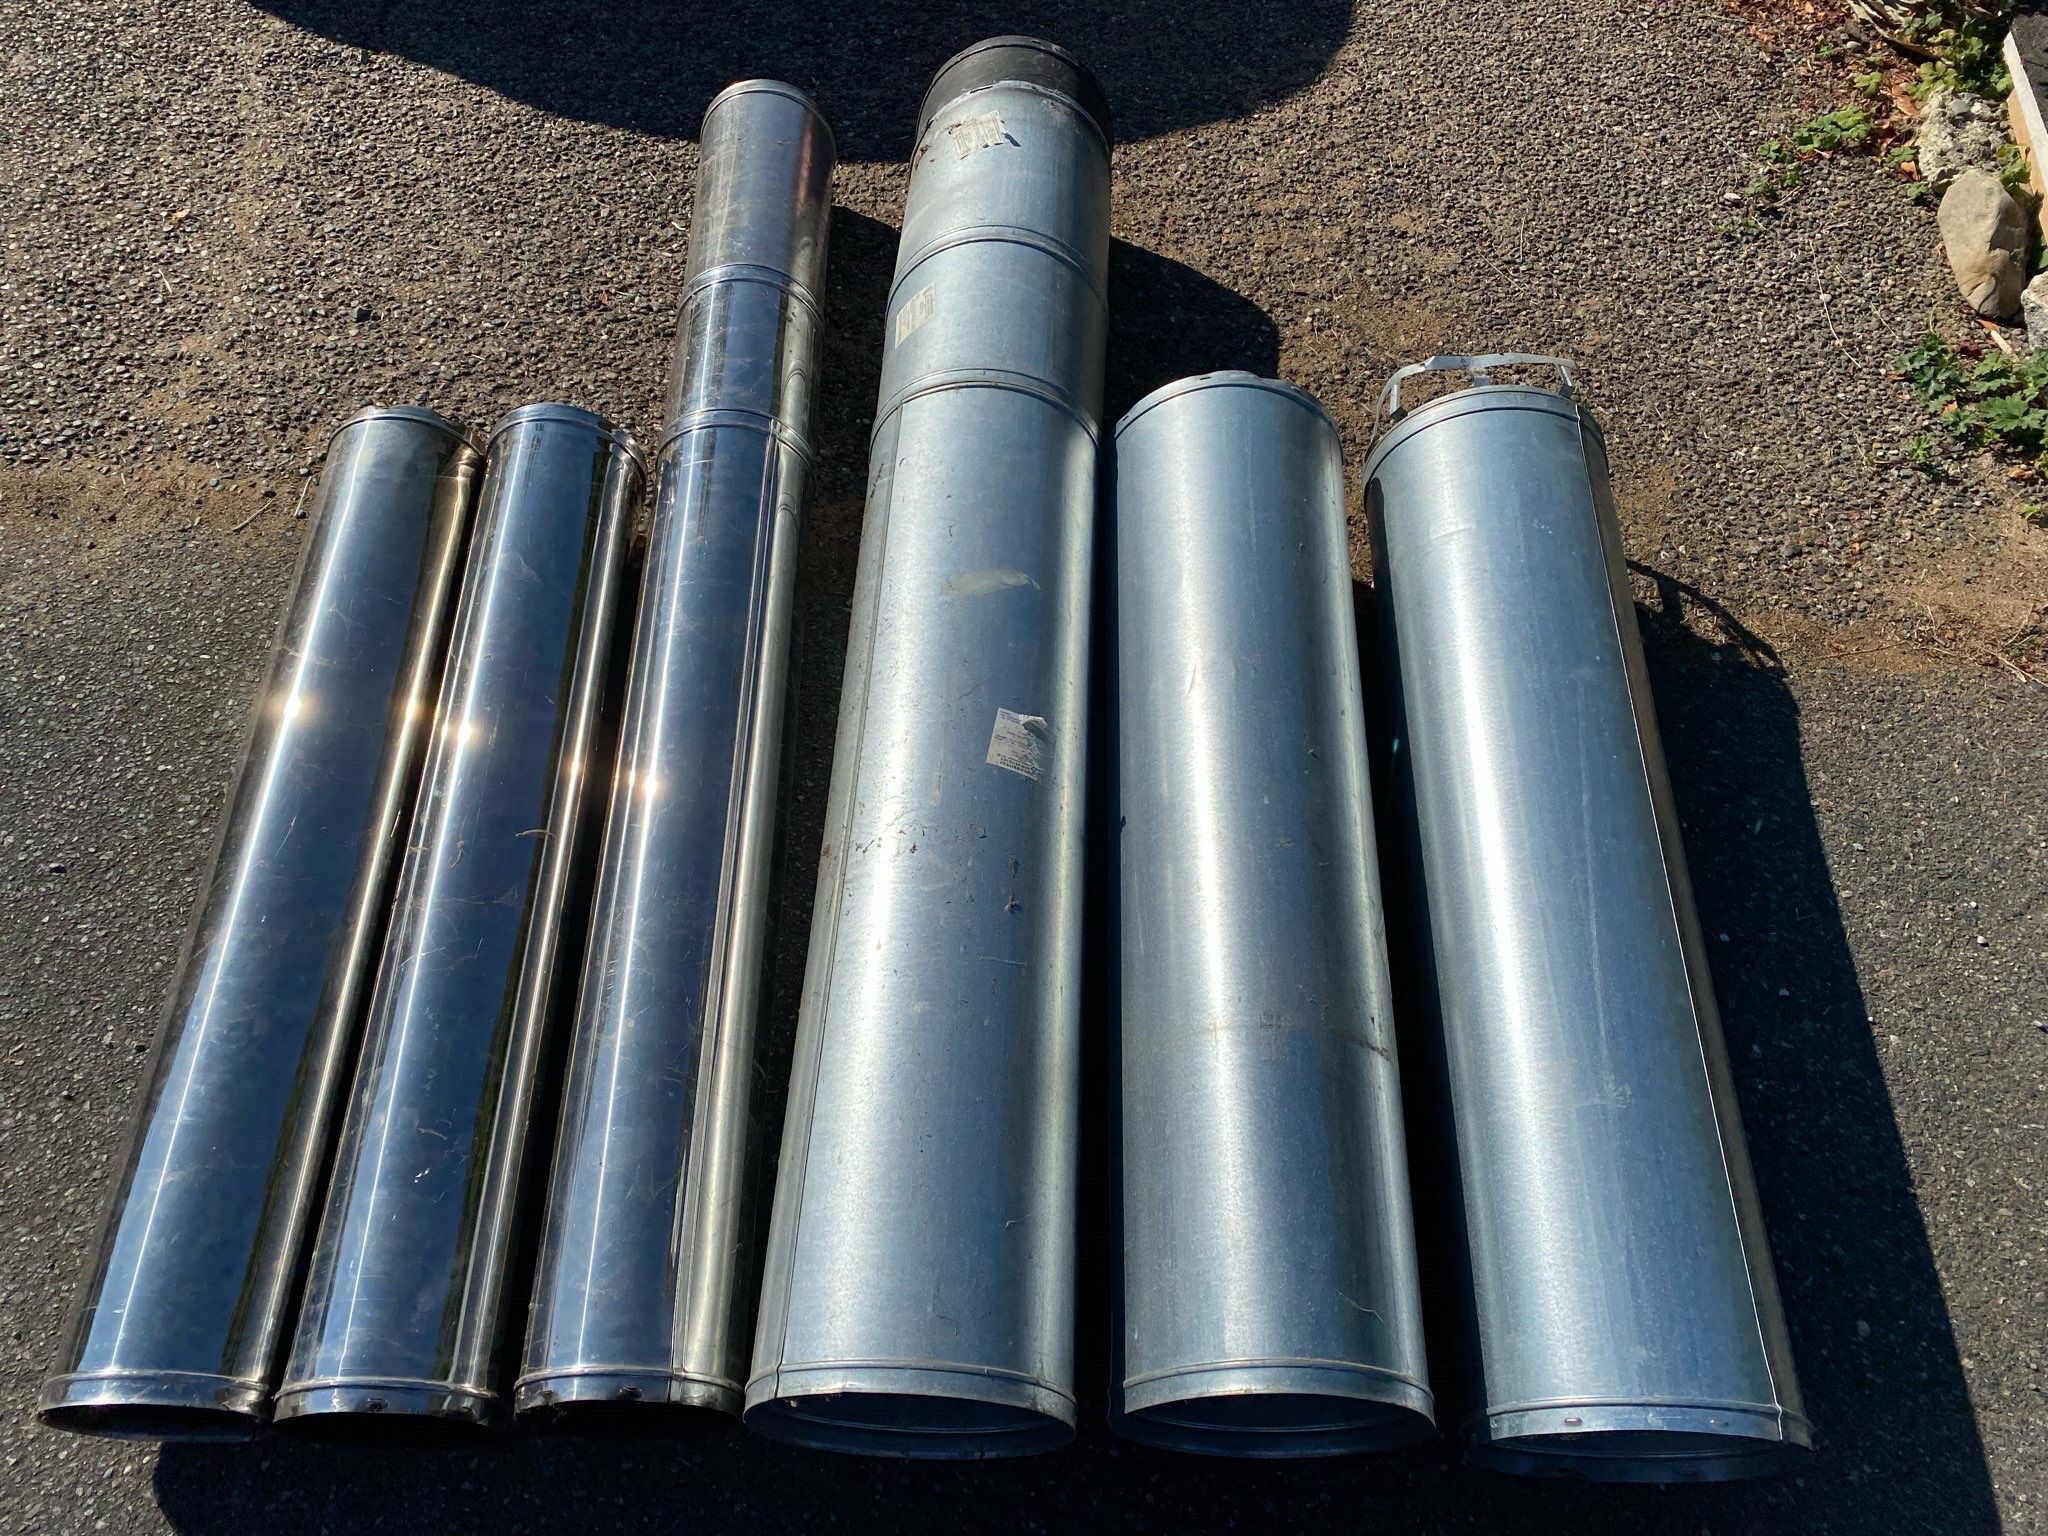 Chimney pipes  Galvanized 12" diameter and Stainless steel 8" diameter: 47.5" (3 pieces), 17.5" and 10.5" Galvanized cap for 8" pipe